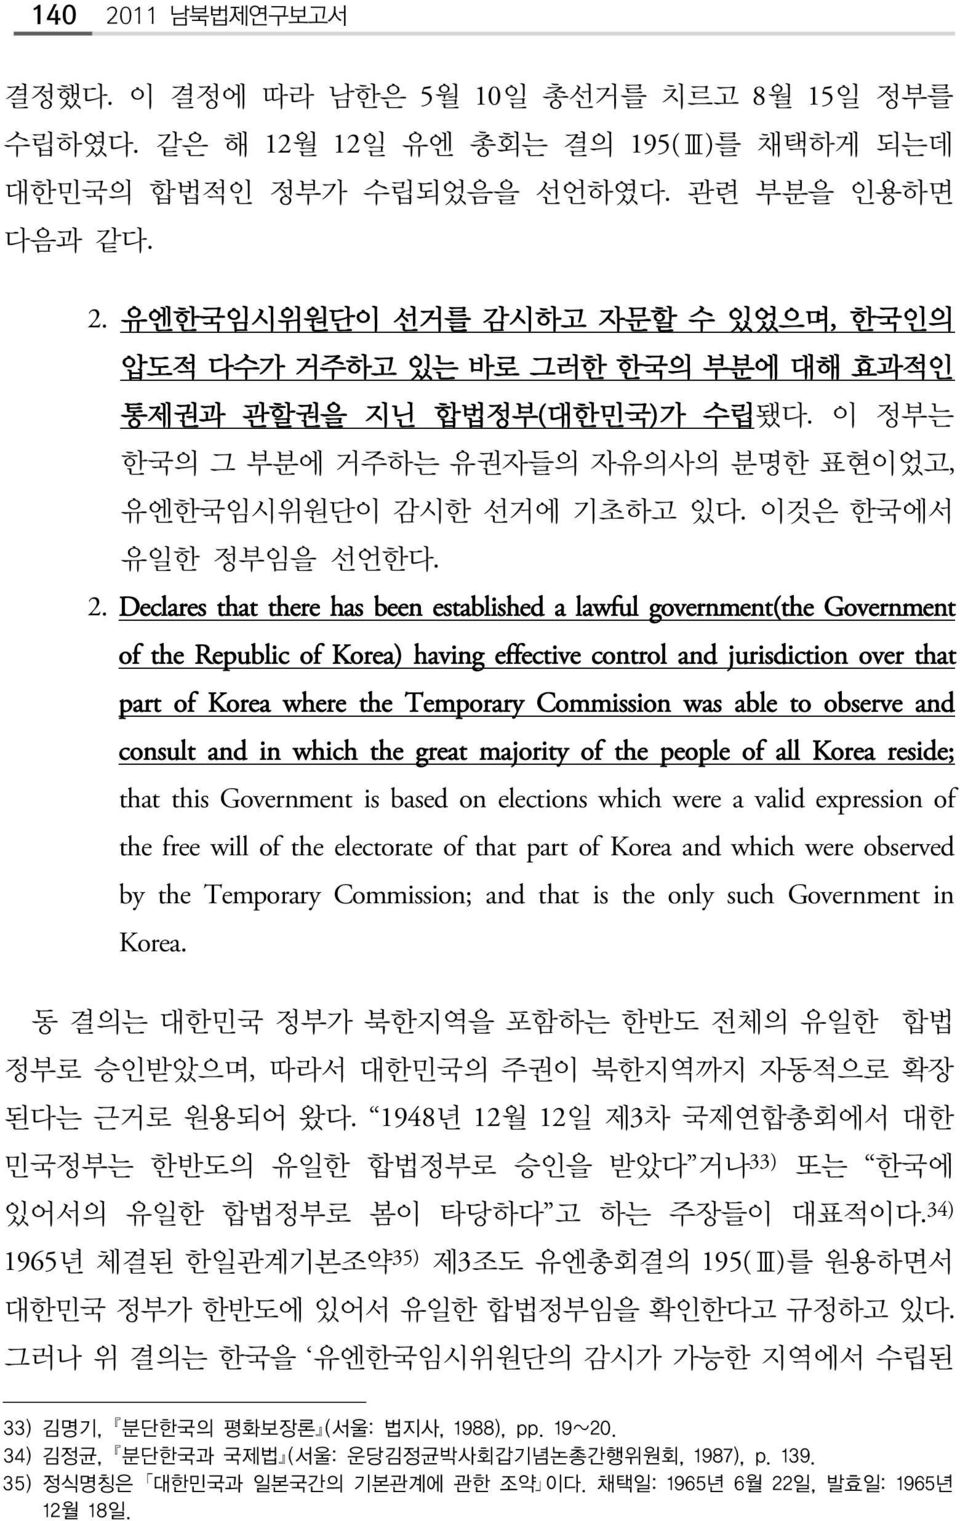 Declares that there has been established a lawful government(the Government of the Republic of Korea) having effective control and jurisdiction over that part of Korea where the Temporary Commission